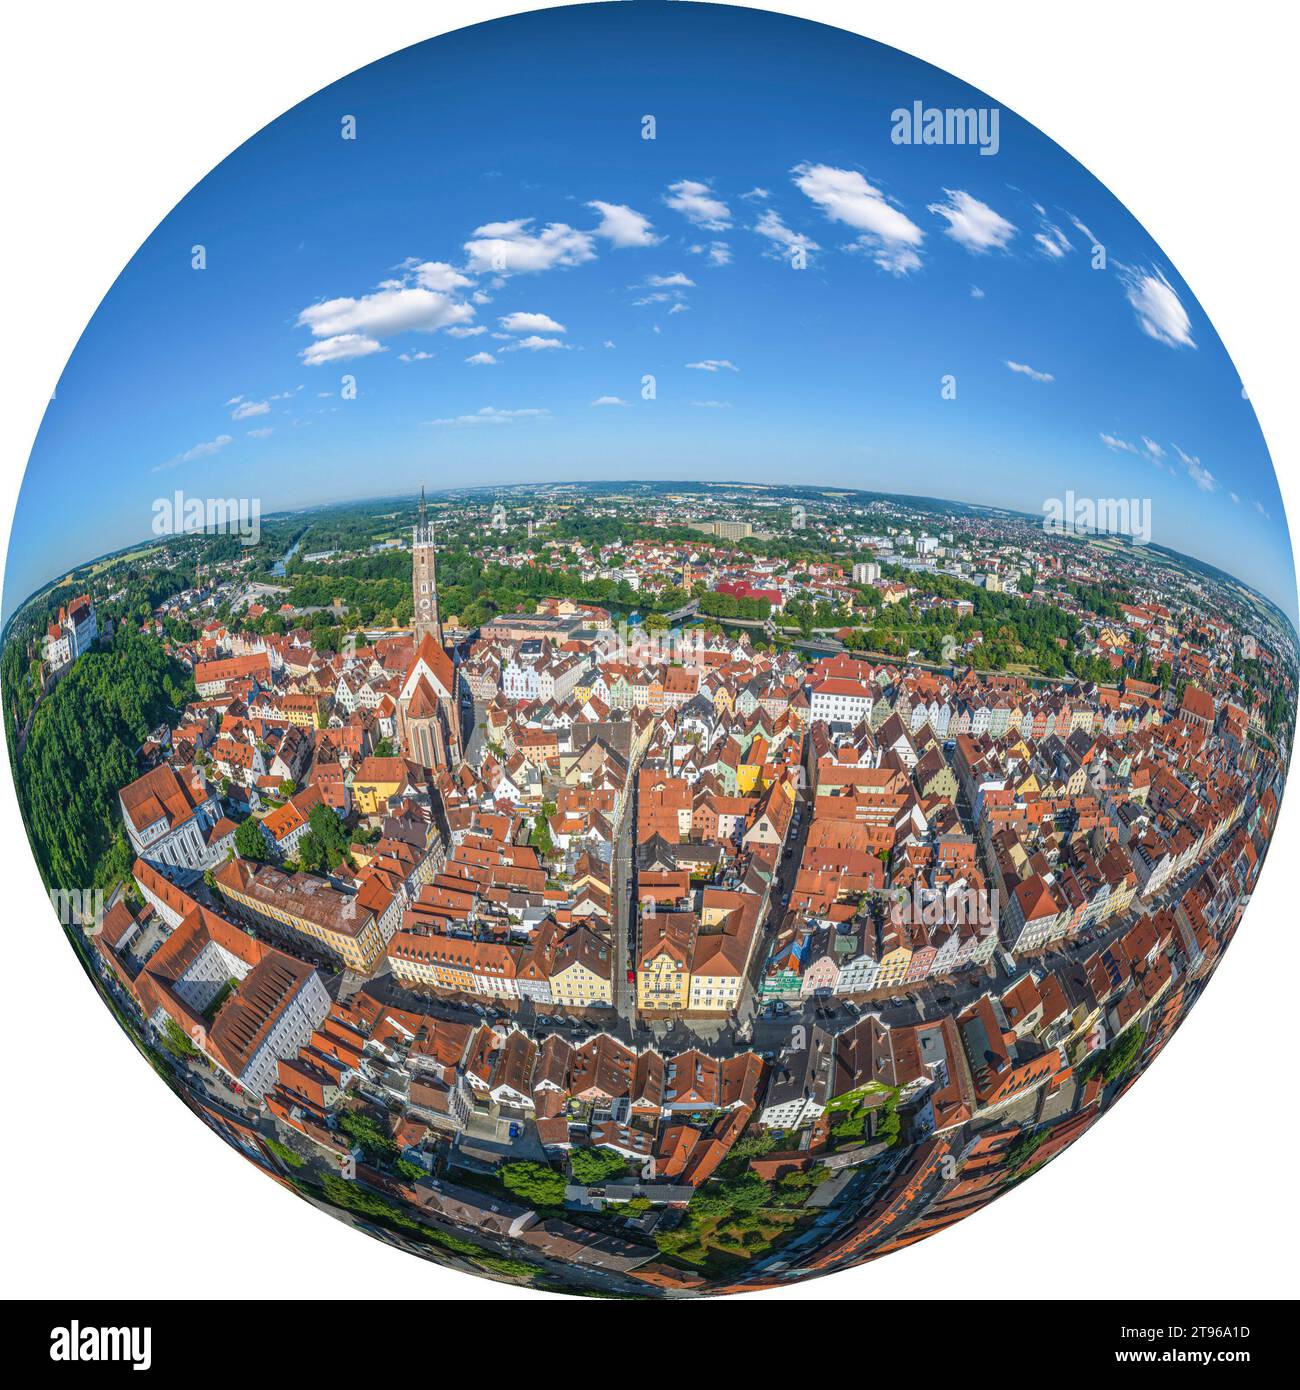 Aerial view to Landshut, the district capital of Lower Bavaria, well known for the landshut wedding Stock Photo